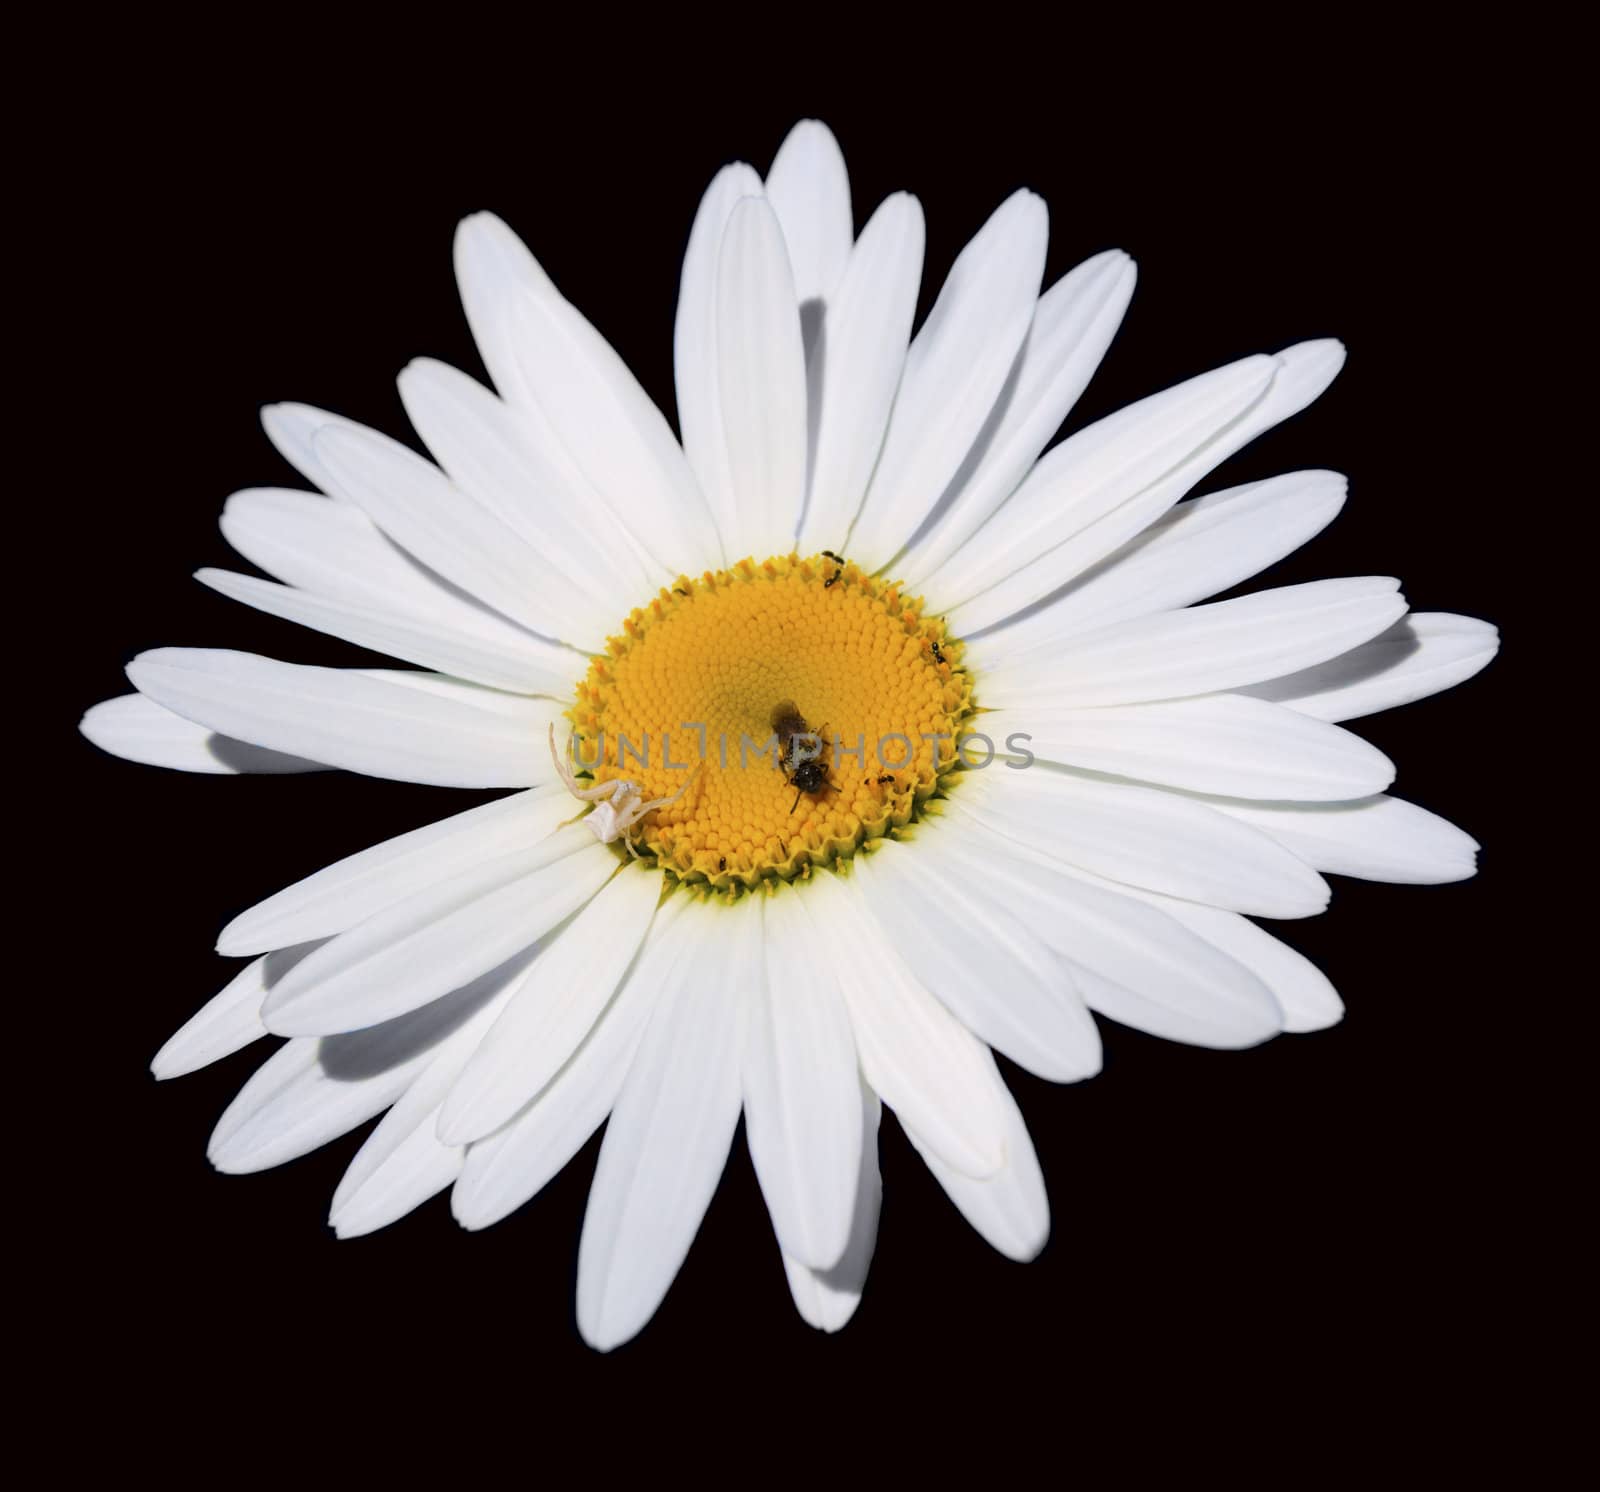 camomile flower with a spider and a bee  isolated on black background